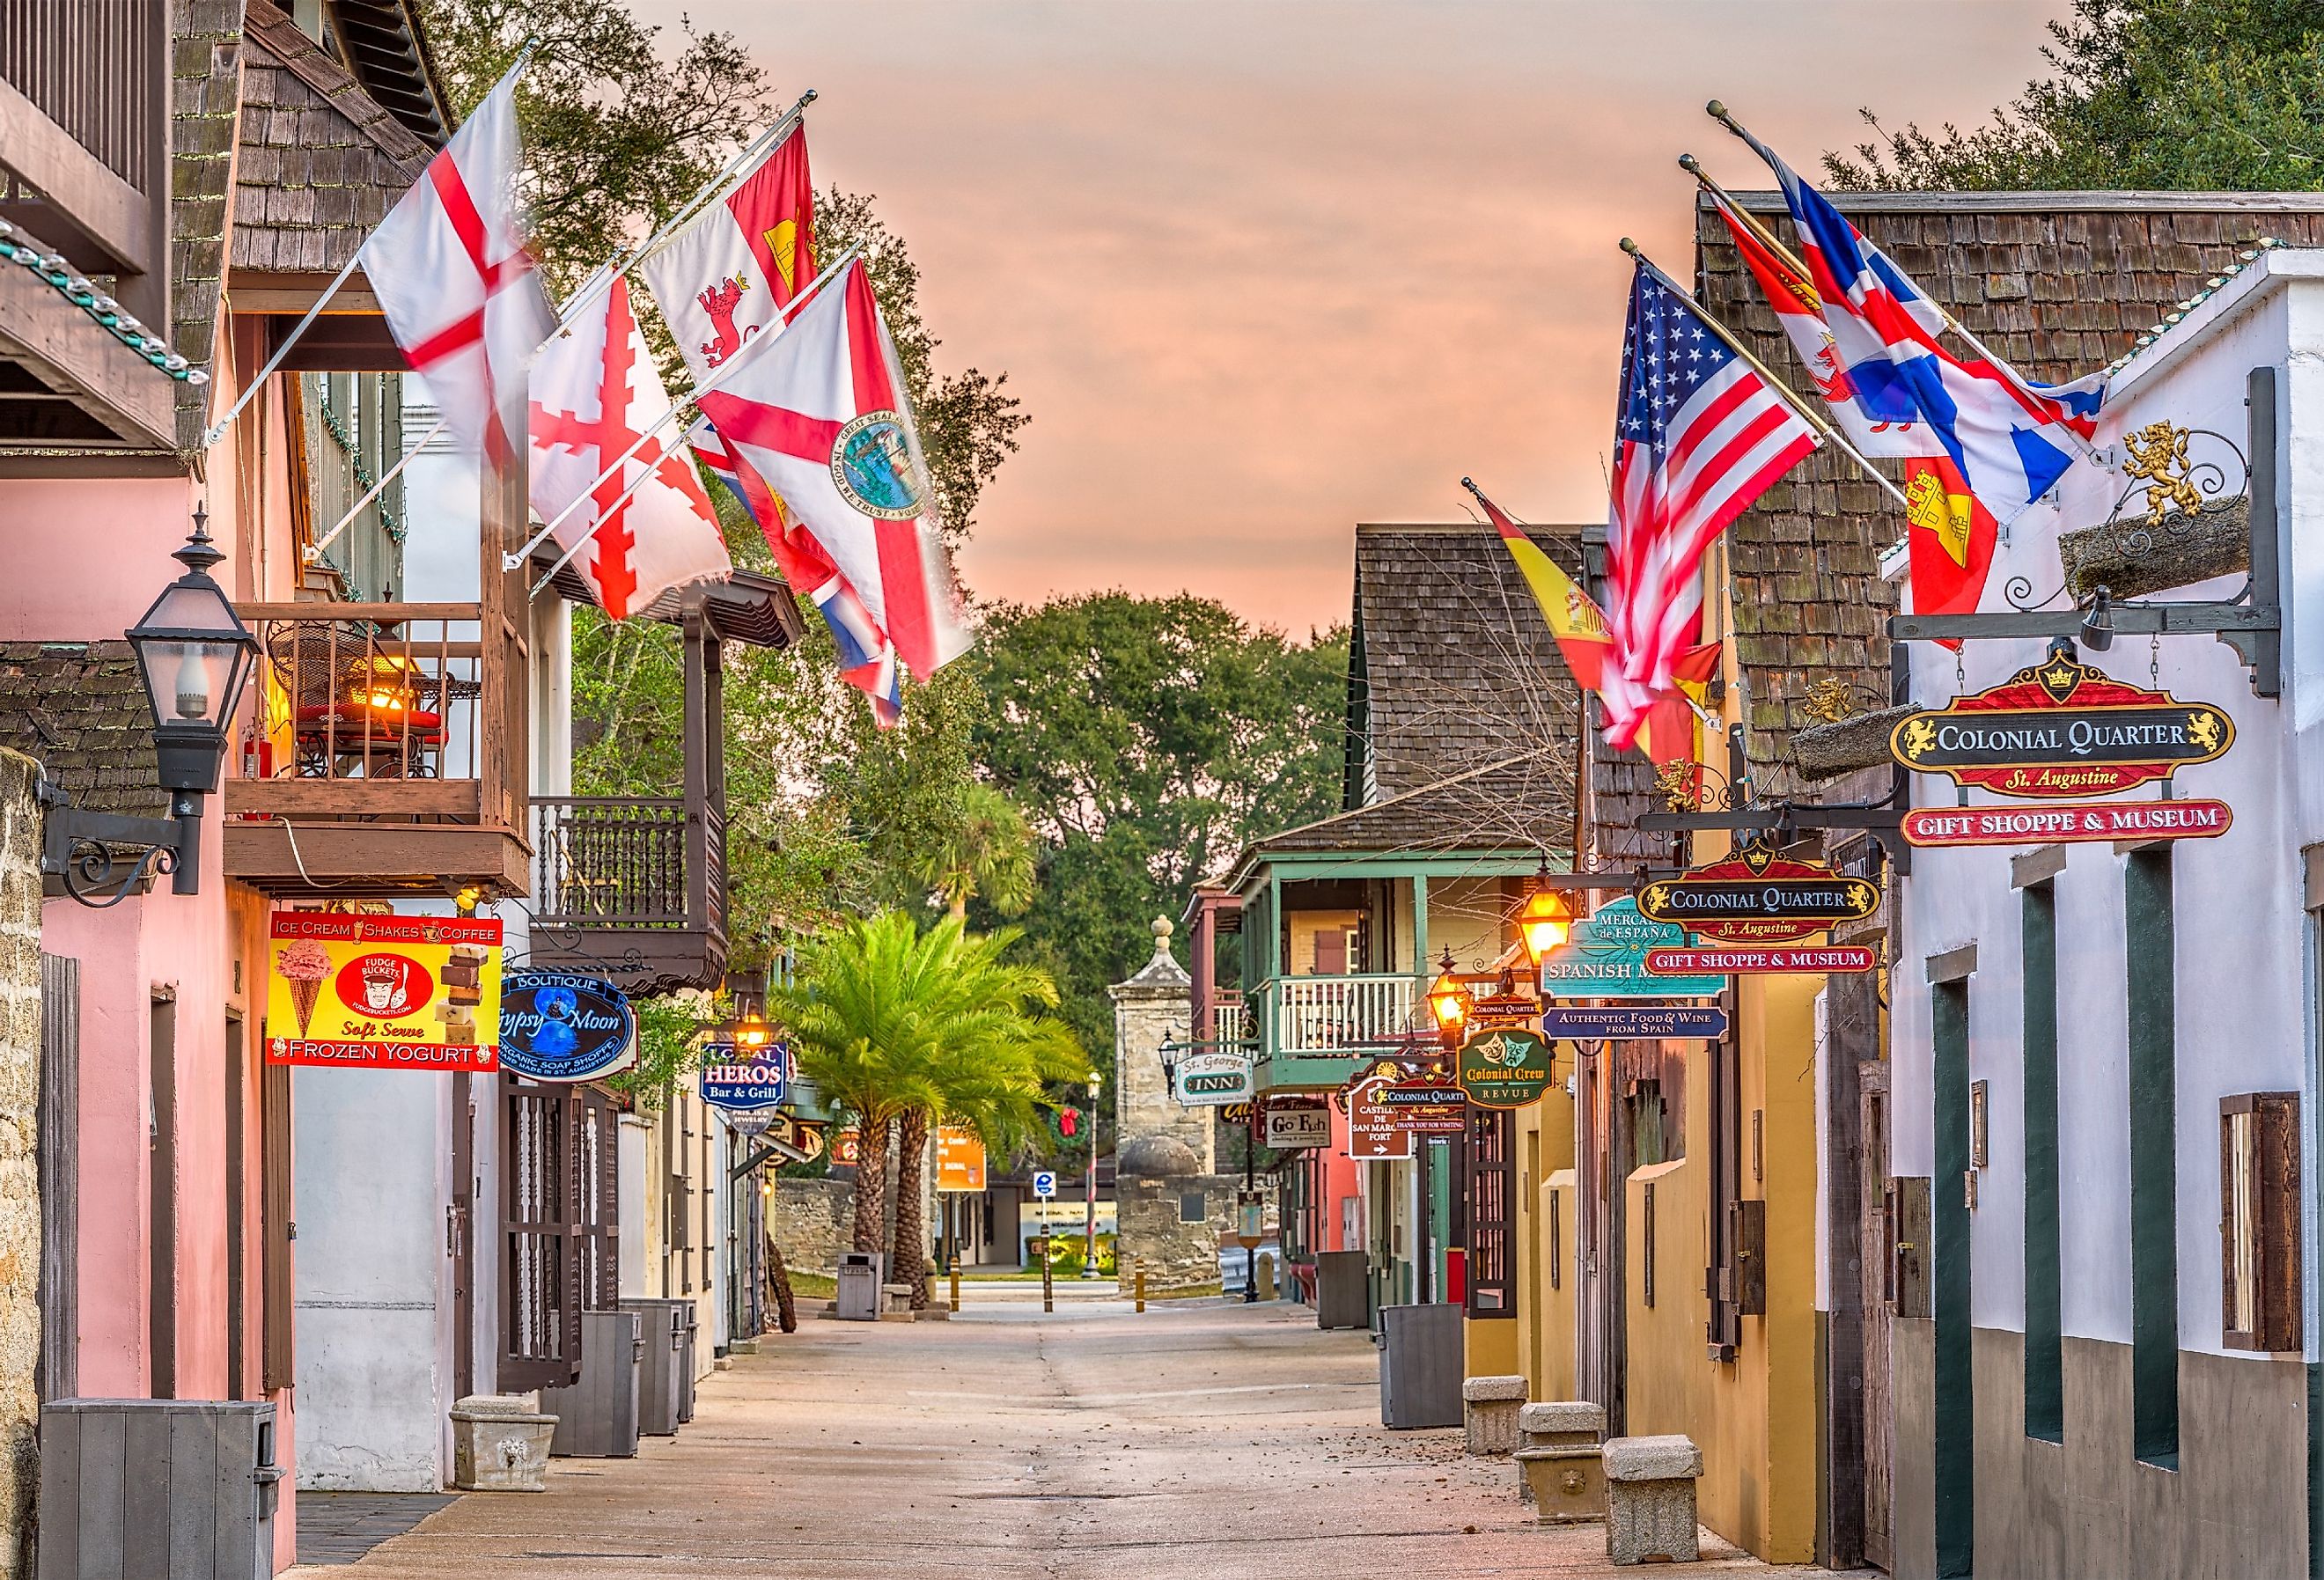 St. Augustine, Florida, shops and inns line St. George street with flags. Image credit Sean Pavone via Shutterstock